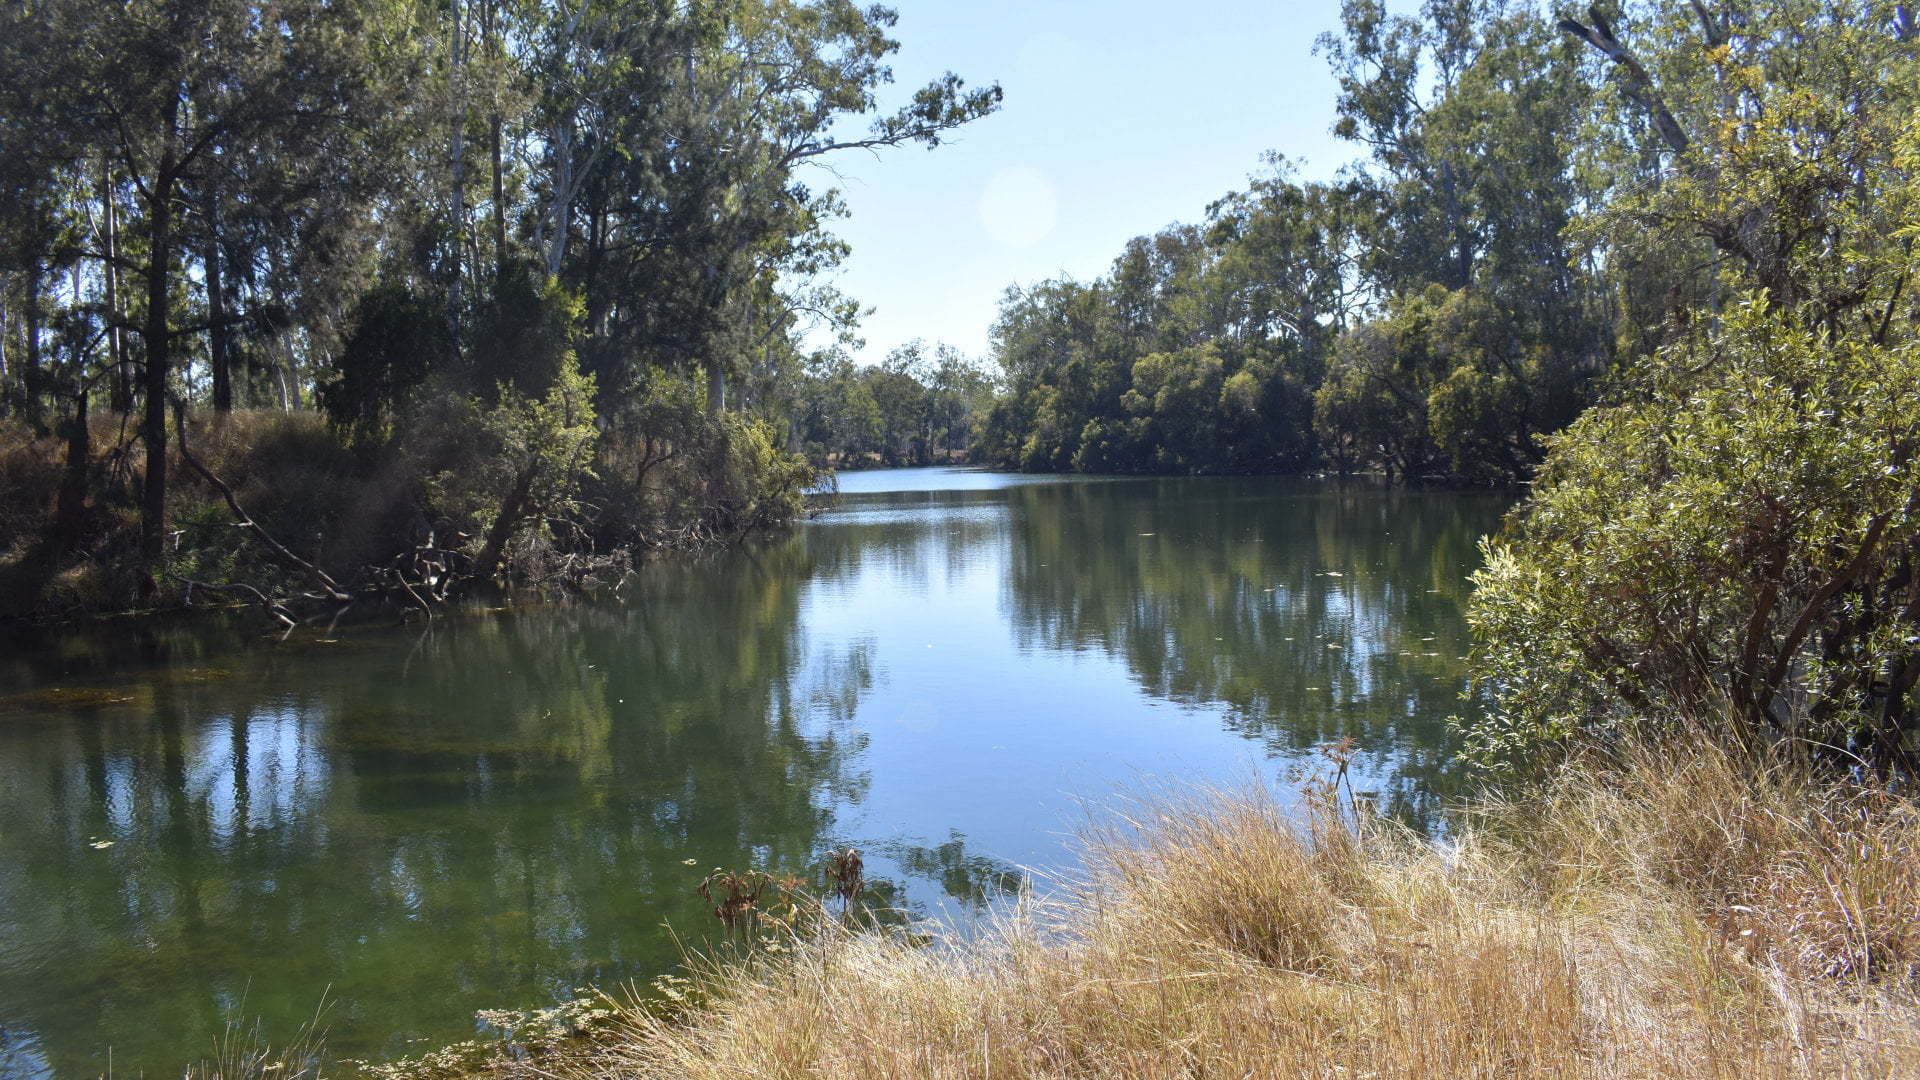 Looking up a wide creek, known as the Bunyip Hole near Mulgildie along the Three Moon Creek